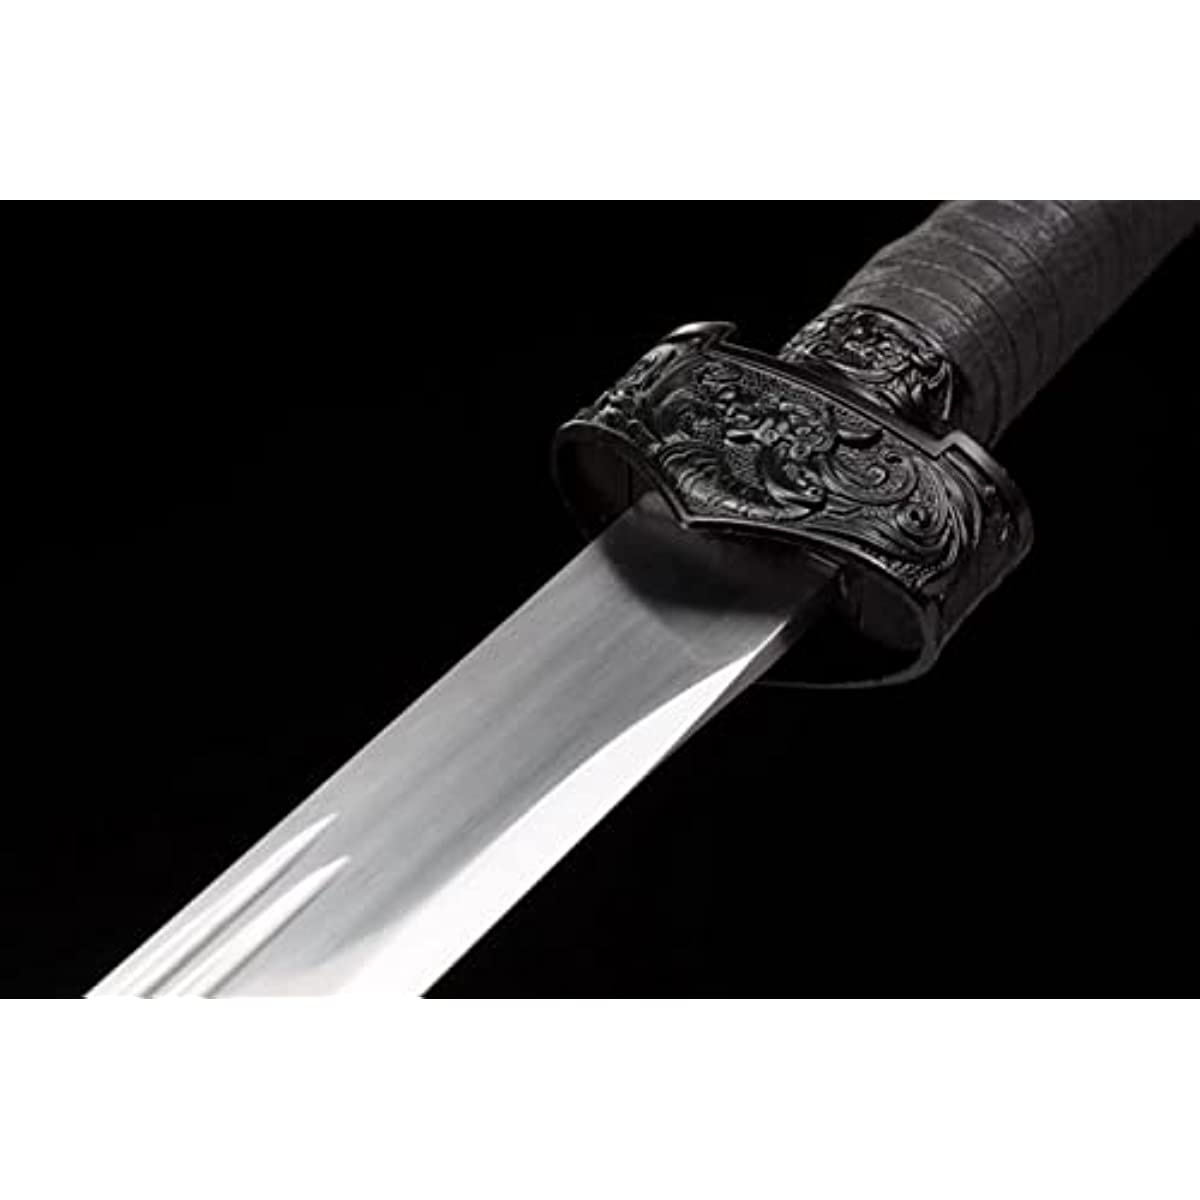 LOONGSWORD,chinese sword,Yanling dao Swords Forged High Carbon Steel Blades,Alloy Fittings